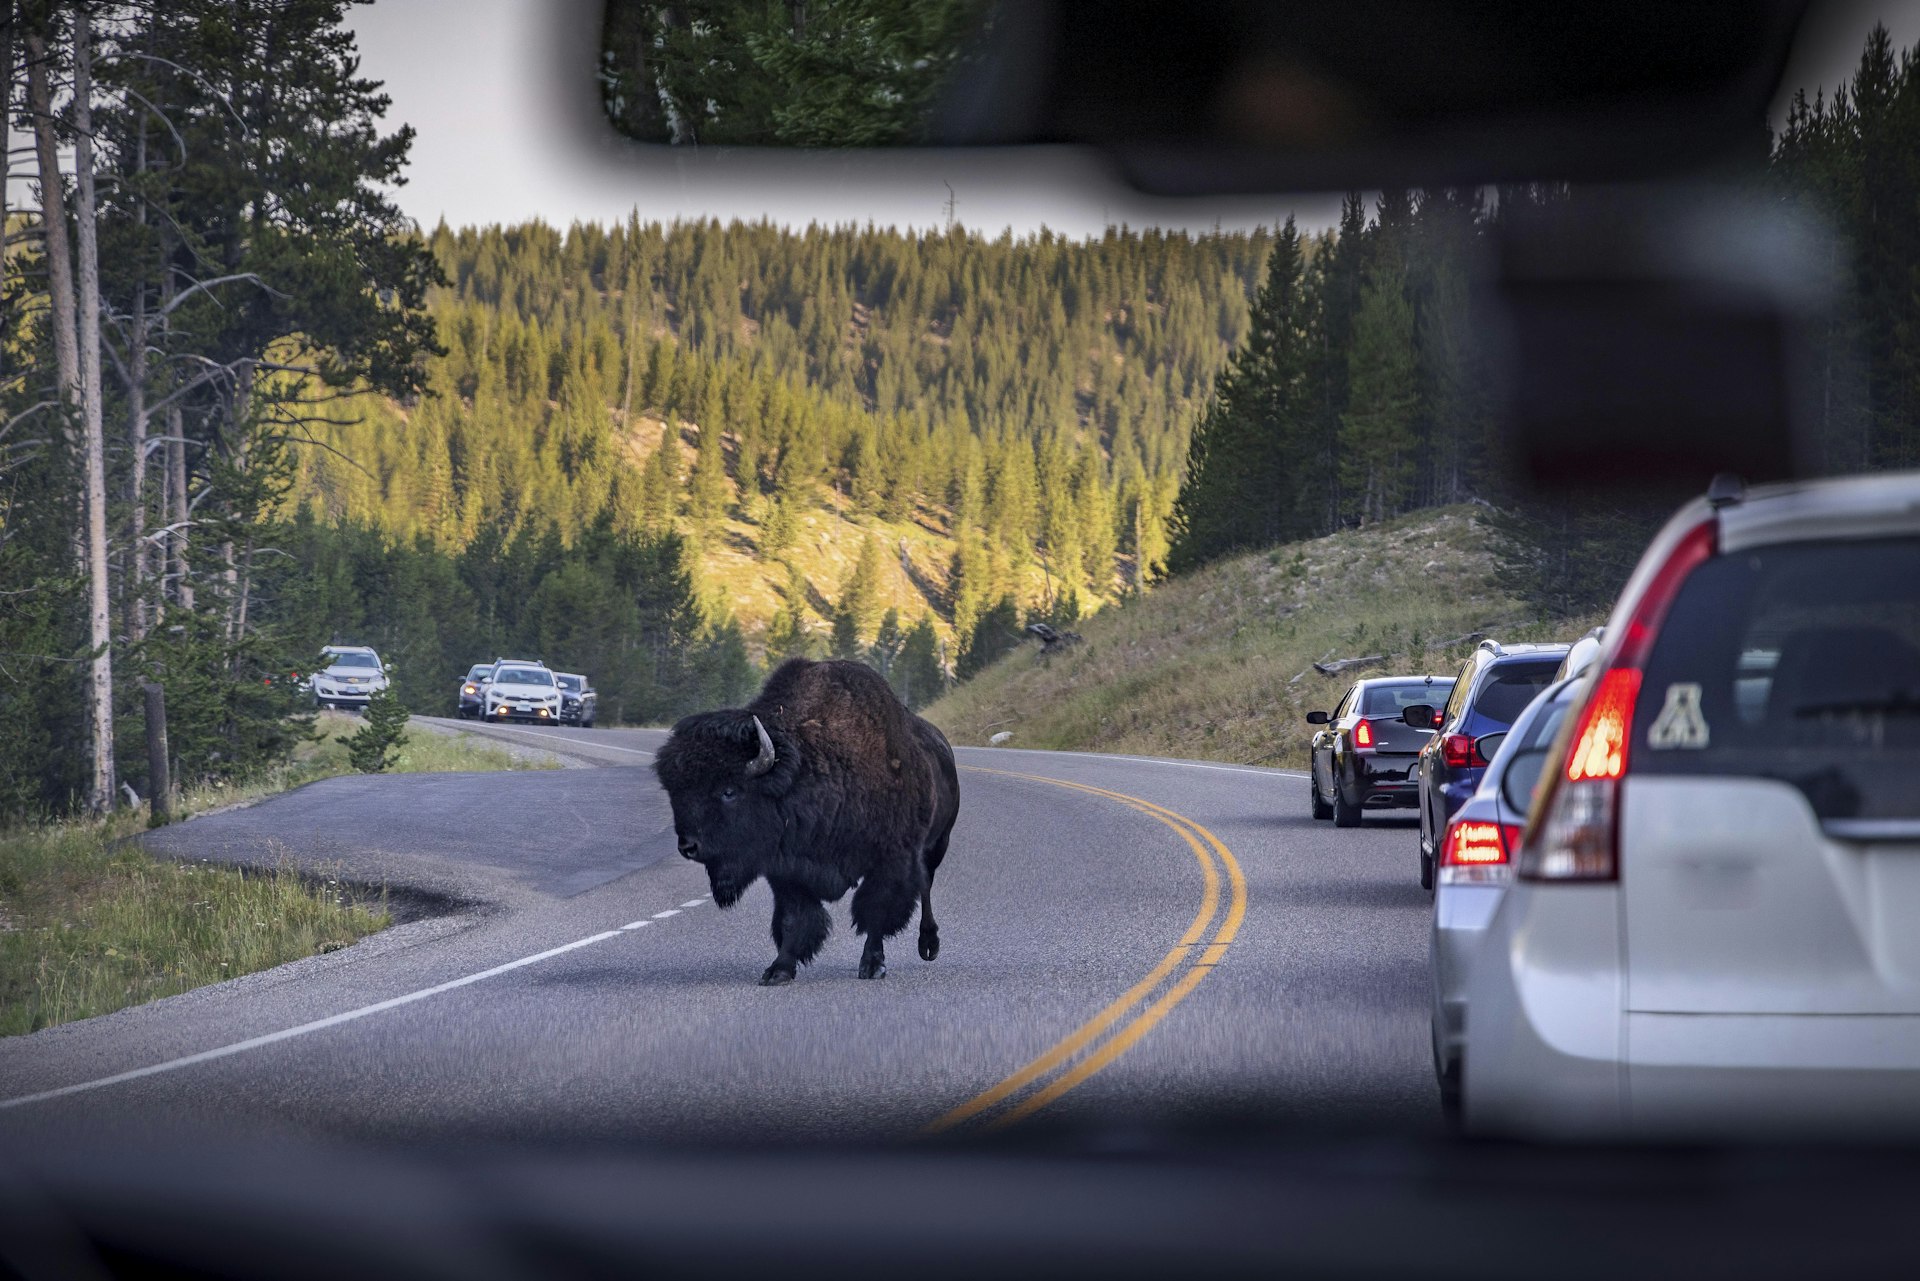 A bison stands on the road with cars and trucks waiting nearby